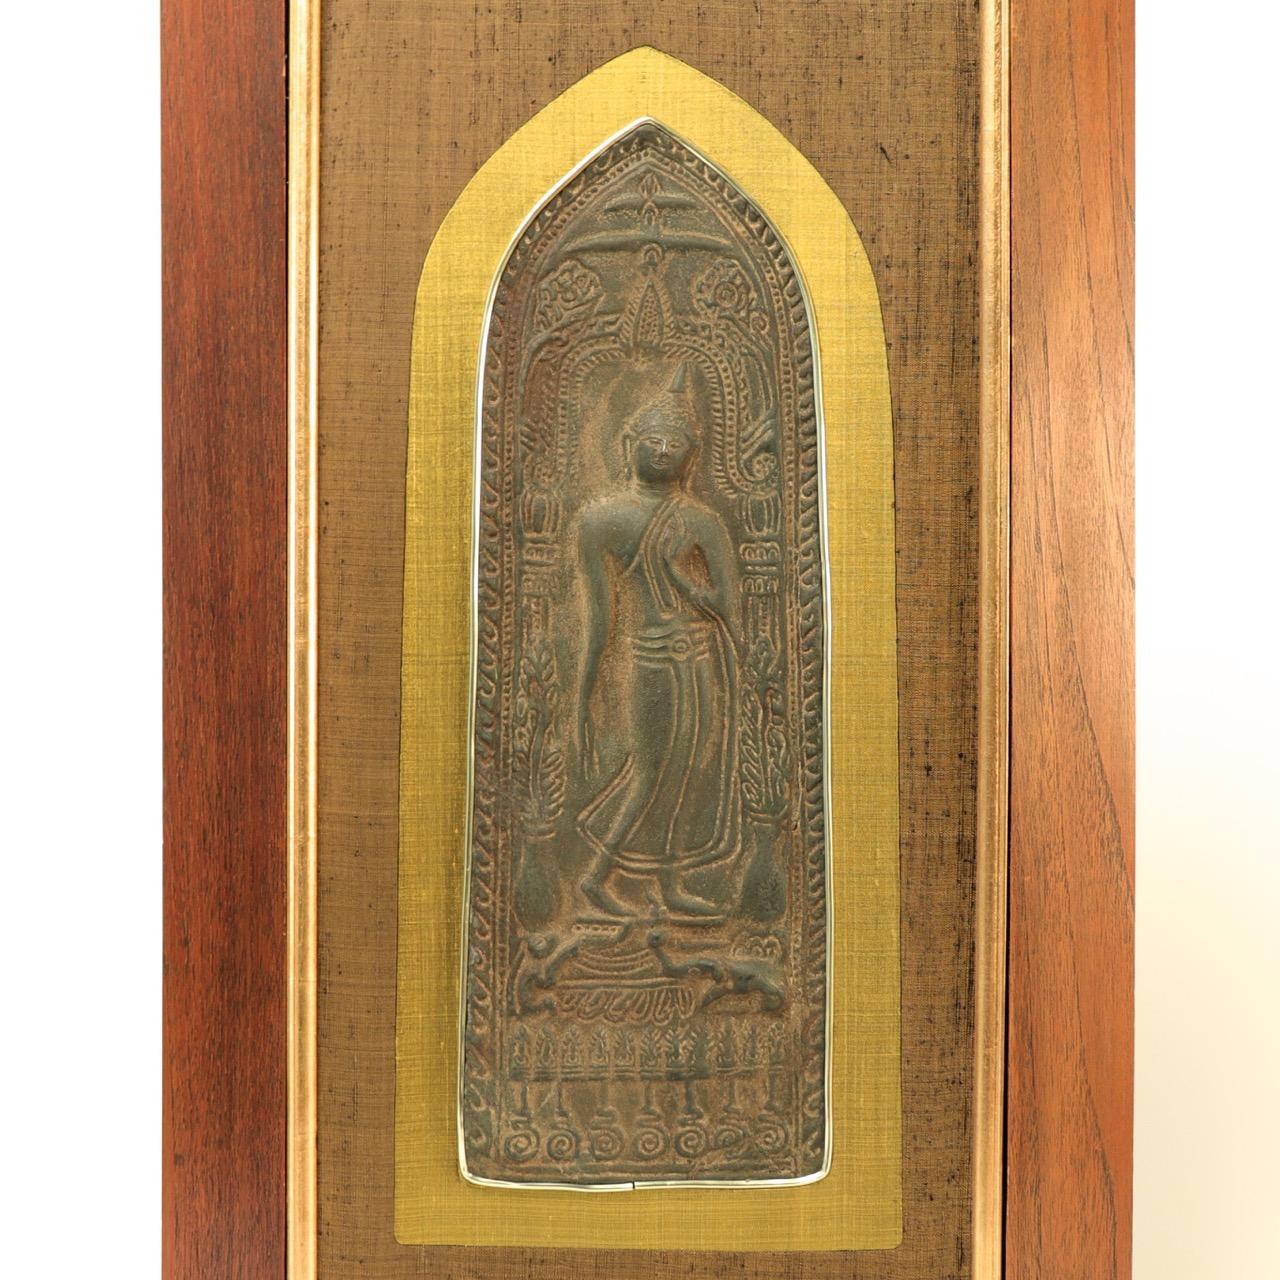 Thai Buddhist votive plaque, Sukhothai style, cast in relief from a metal alloy of tin and lead with an iron like surface of a deep brown color, depicting a relief image of a walking Buddha. His left foot planted firmly on the ground while his right